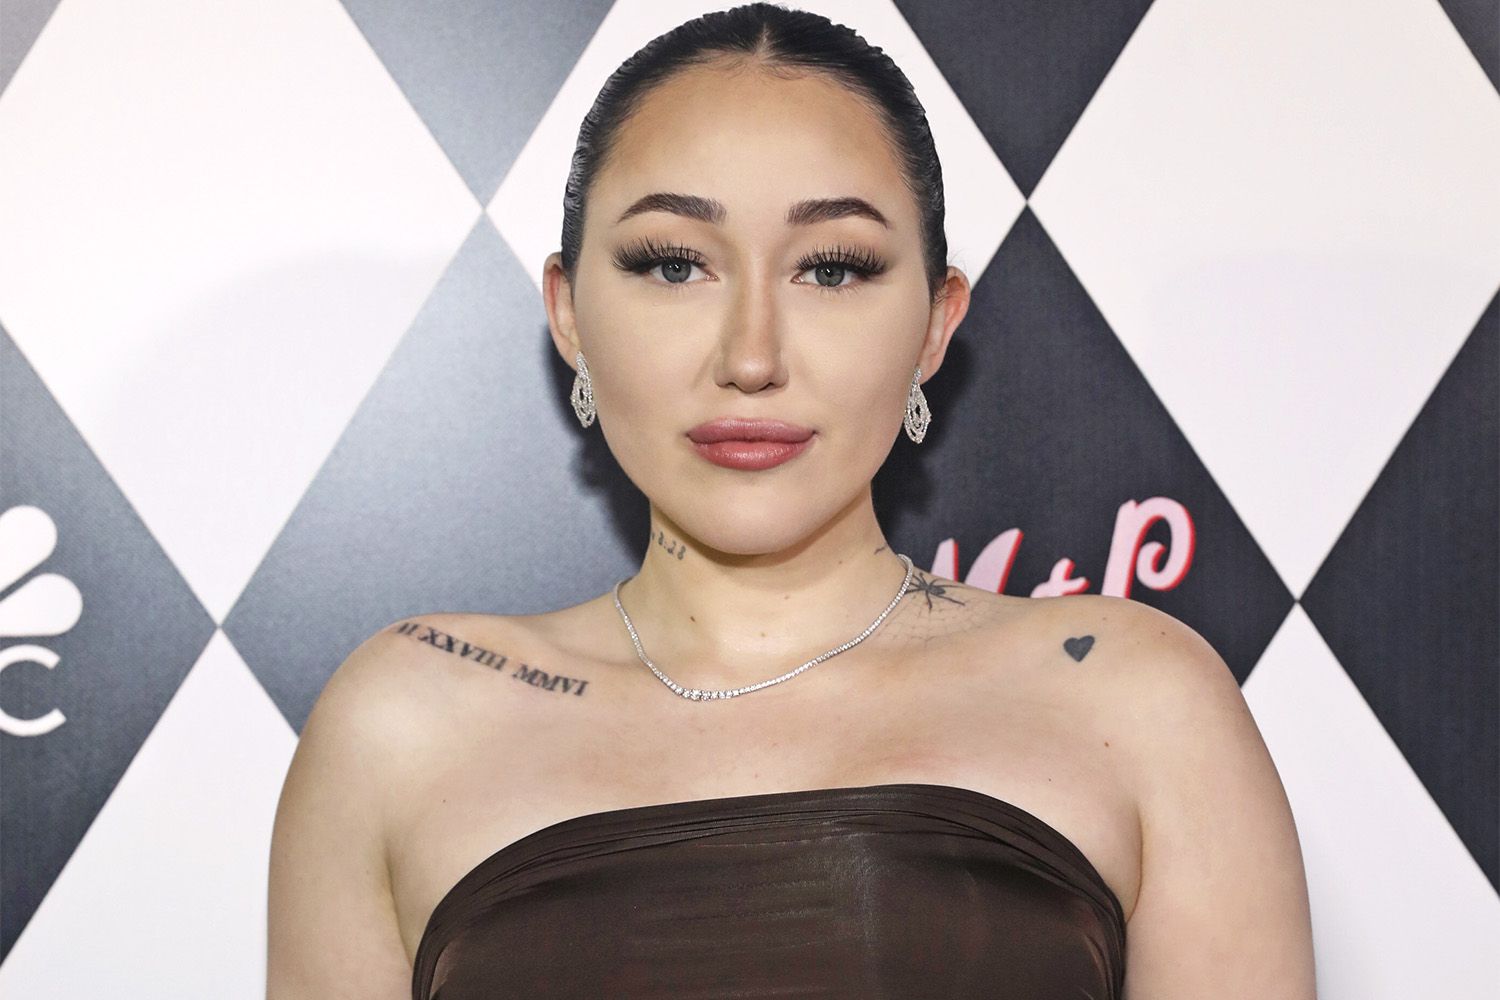 MILEYS NEW YEARS EVE PARTY HOSTED BY MILEY CYRUS AND PETE DAVIDSON -- Pictured: Noah Cyrus arrives on Friday, December 31st -- (Photo by: Aaron Davidson/NBC/NBCU Photo Bank via Getty Images)